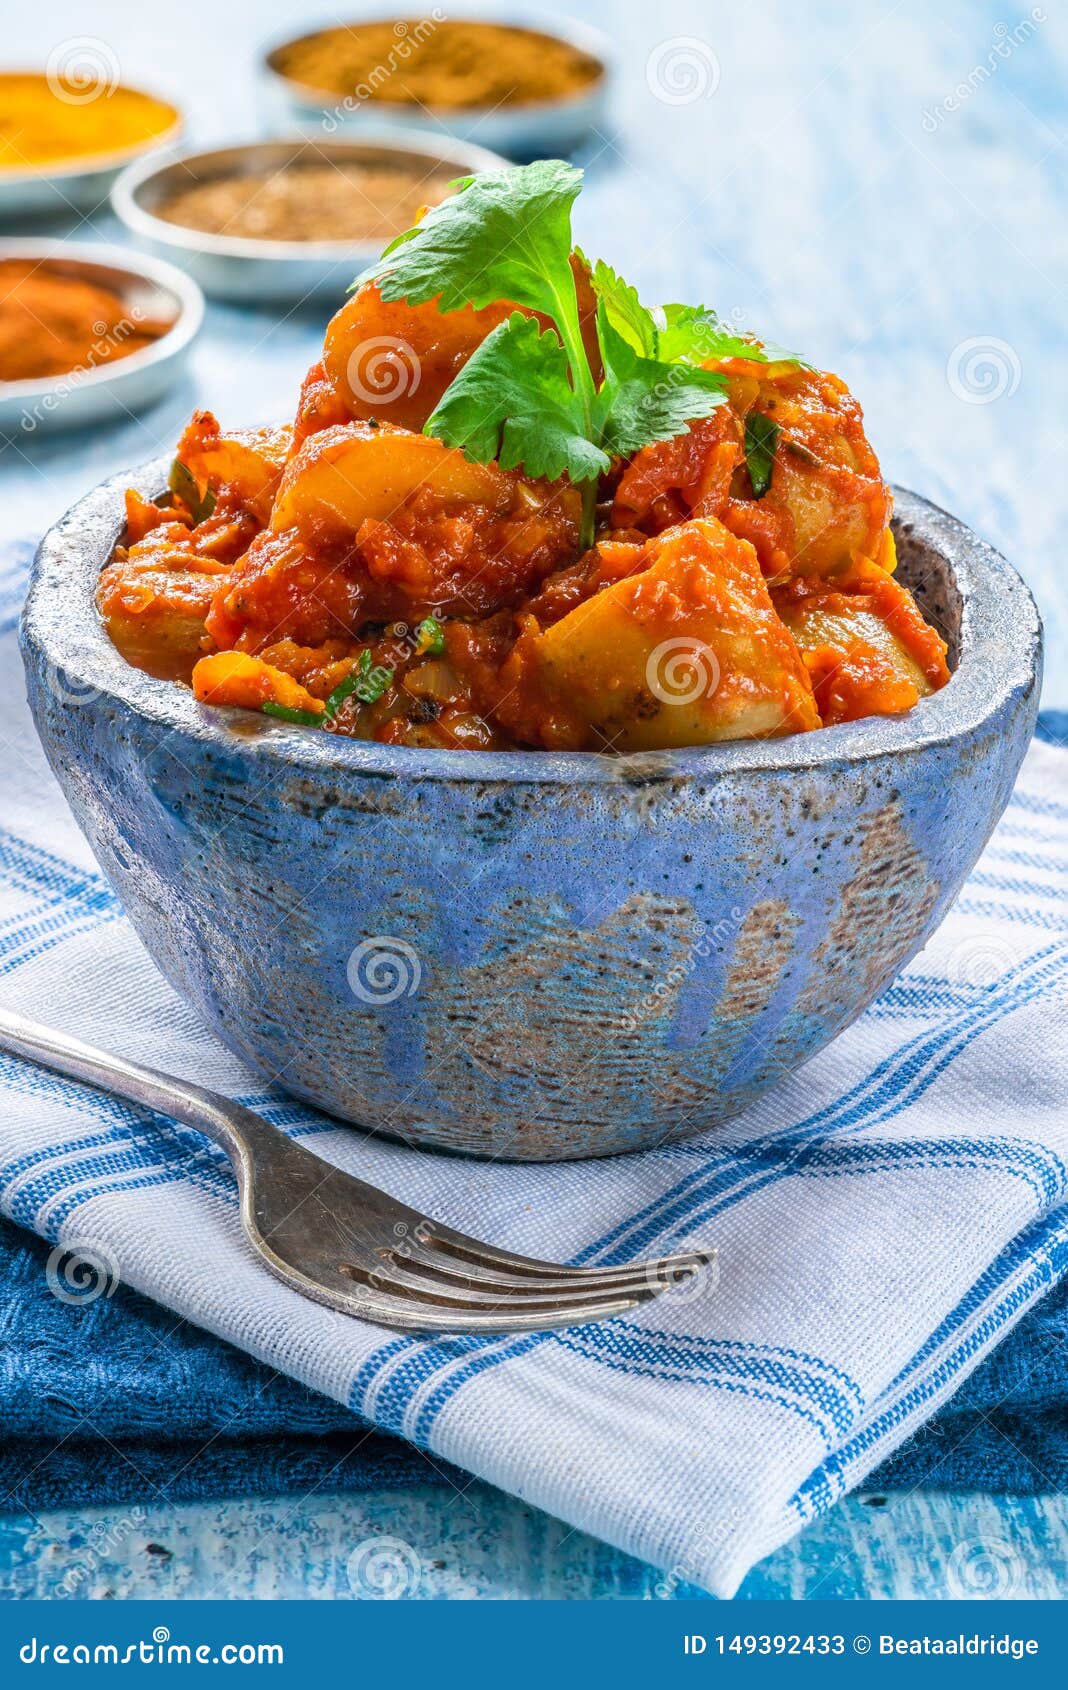 Bombay Aloo - Indian Spiced Potatoes with Tomato Sauce Stock Image ...